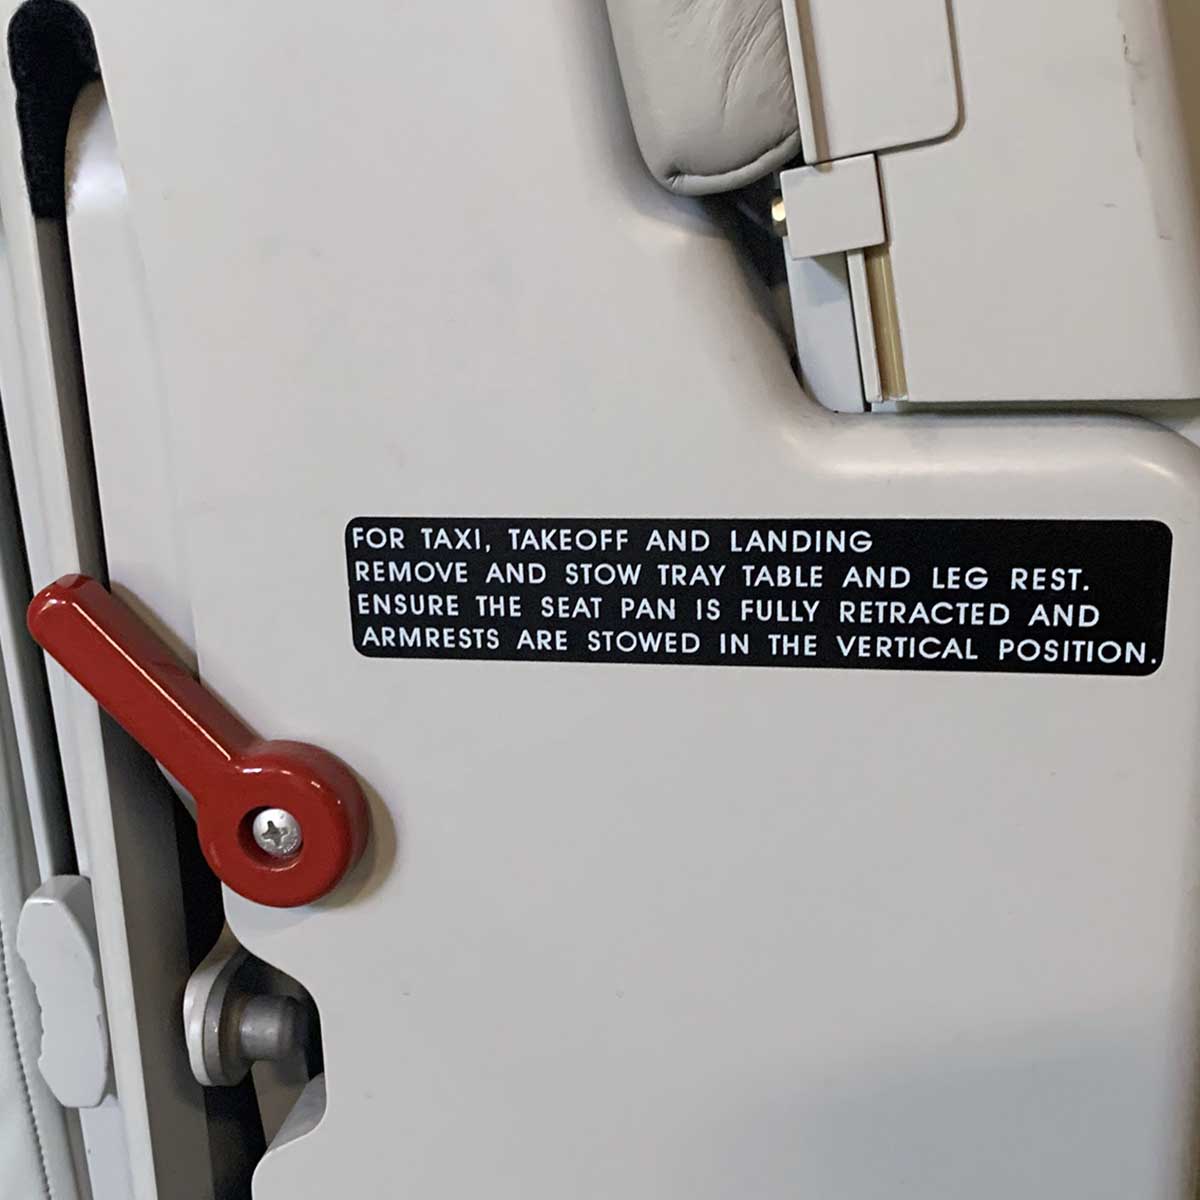 Instruction on Goodyear high comfort cabin attendant seat of Brussels Airlines Airbus A330.